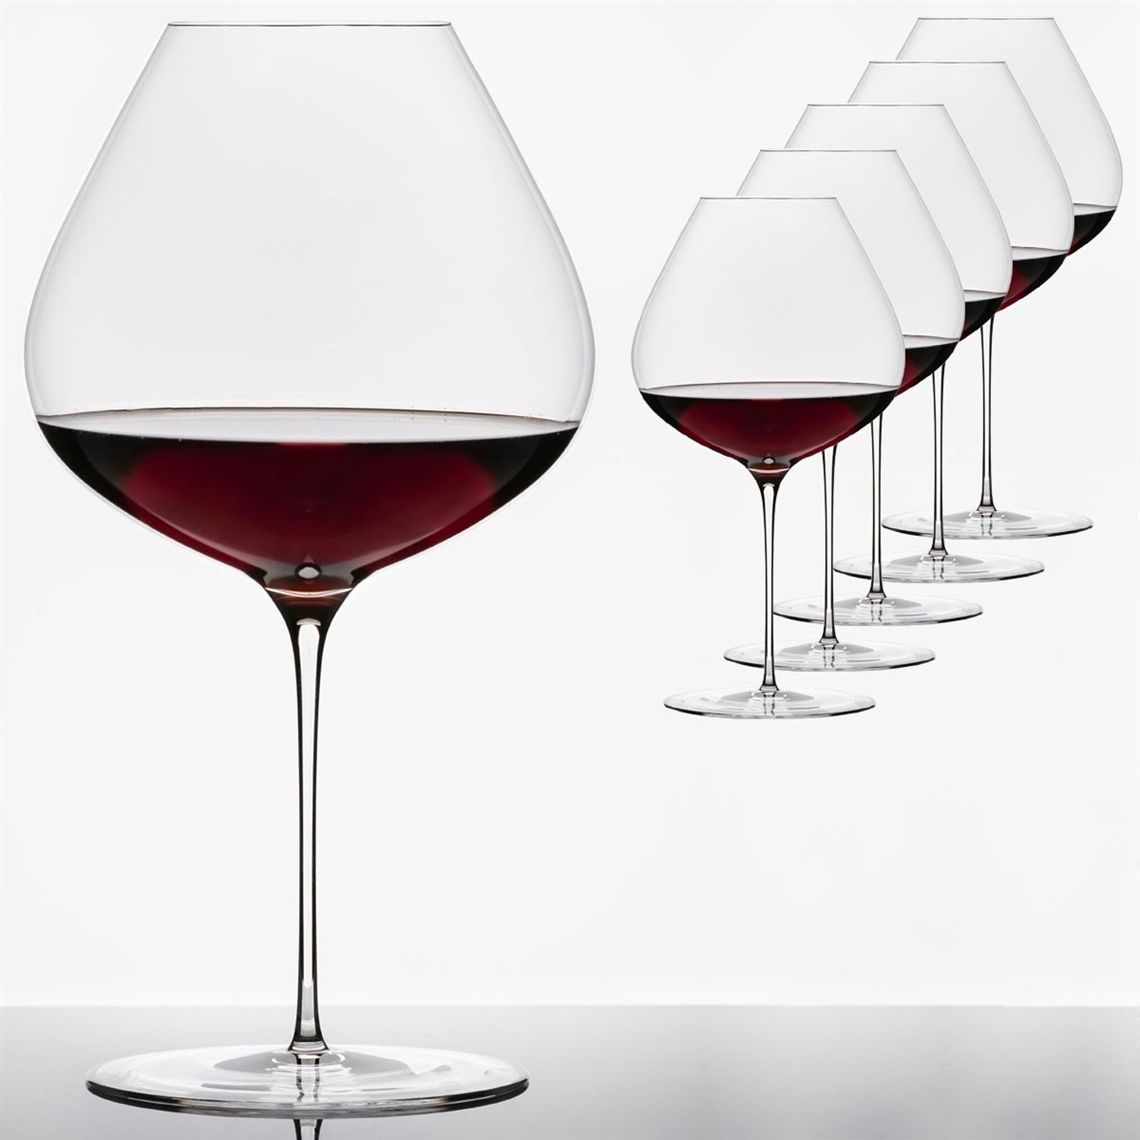 Le Septentrional Red Wine Glass - Set of 6